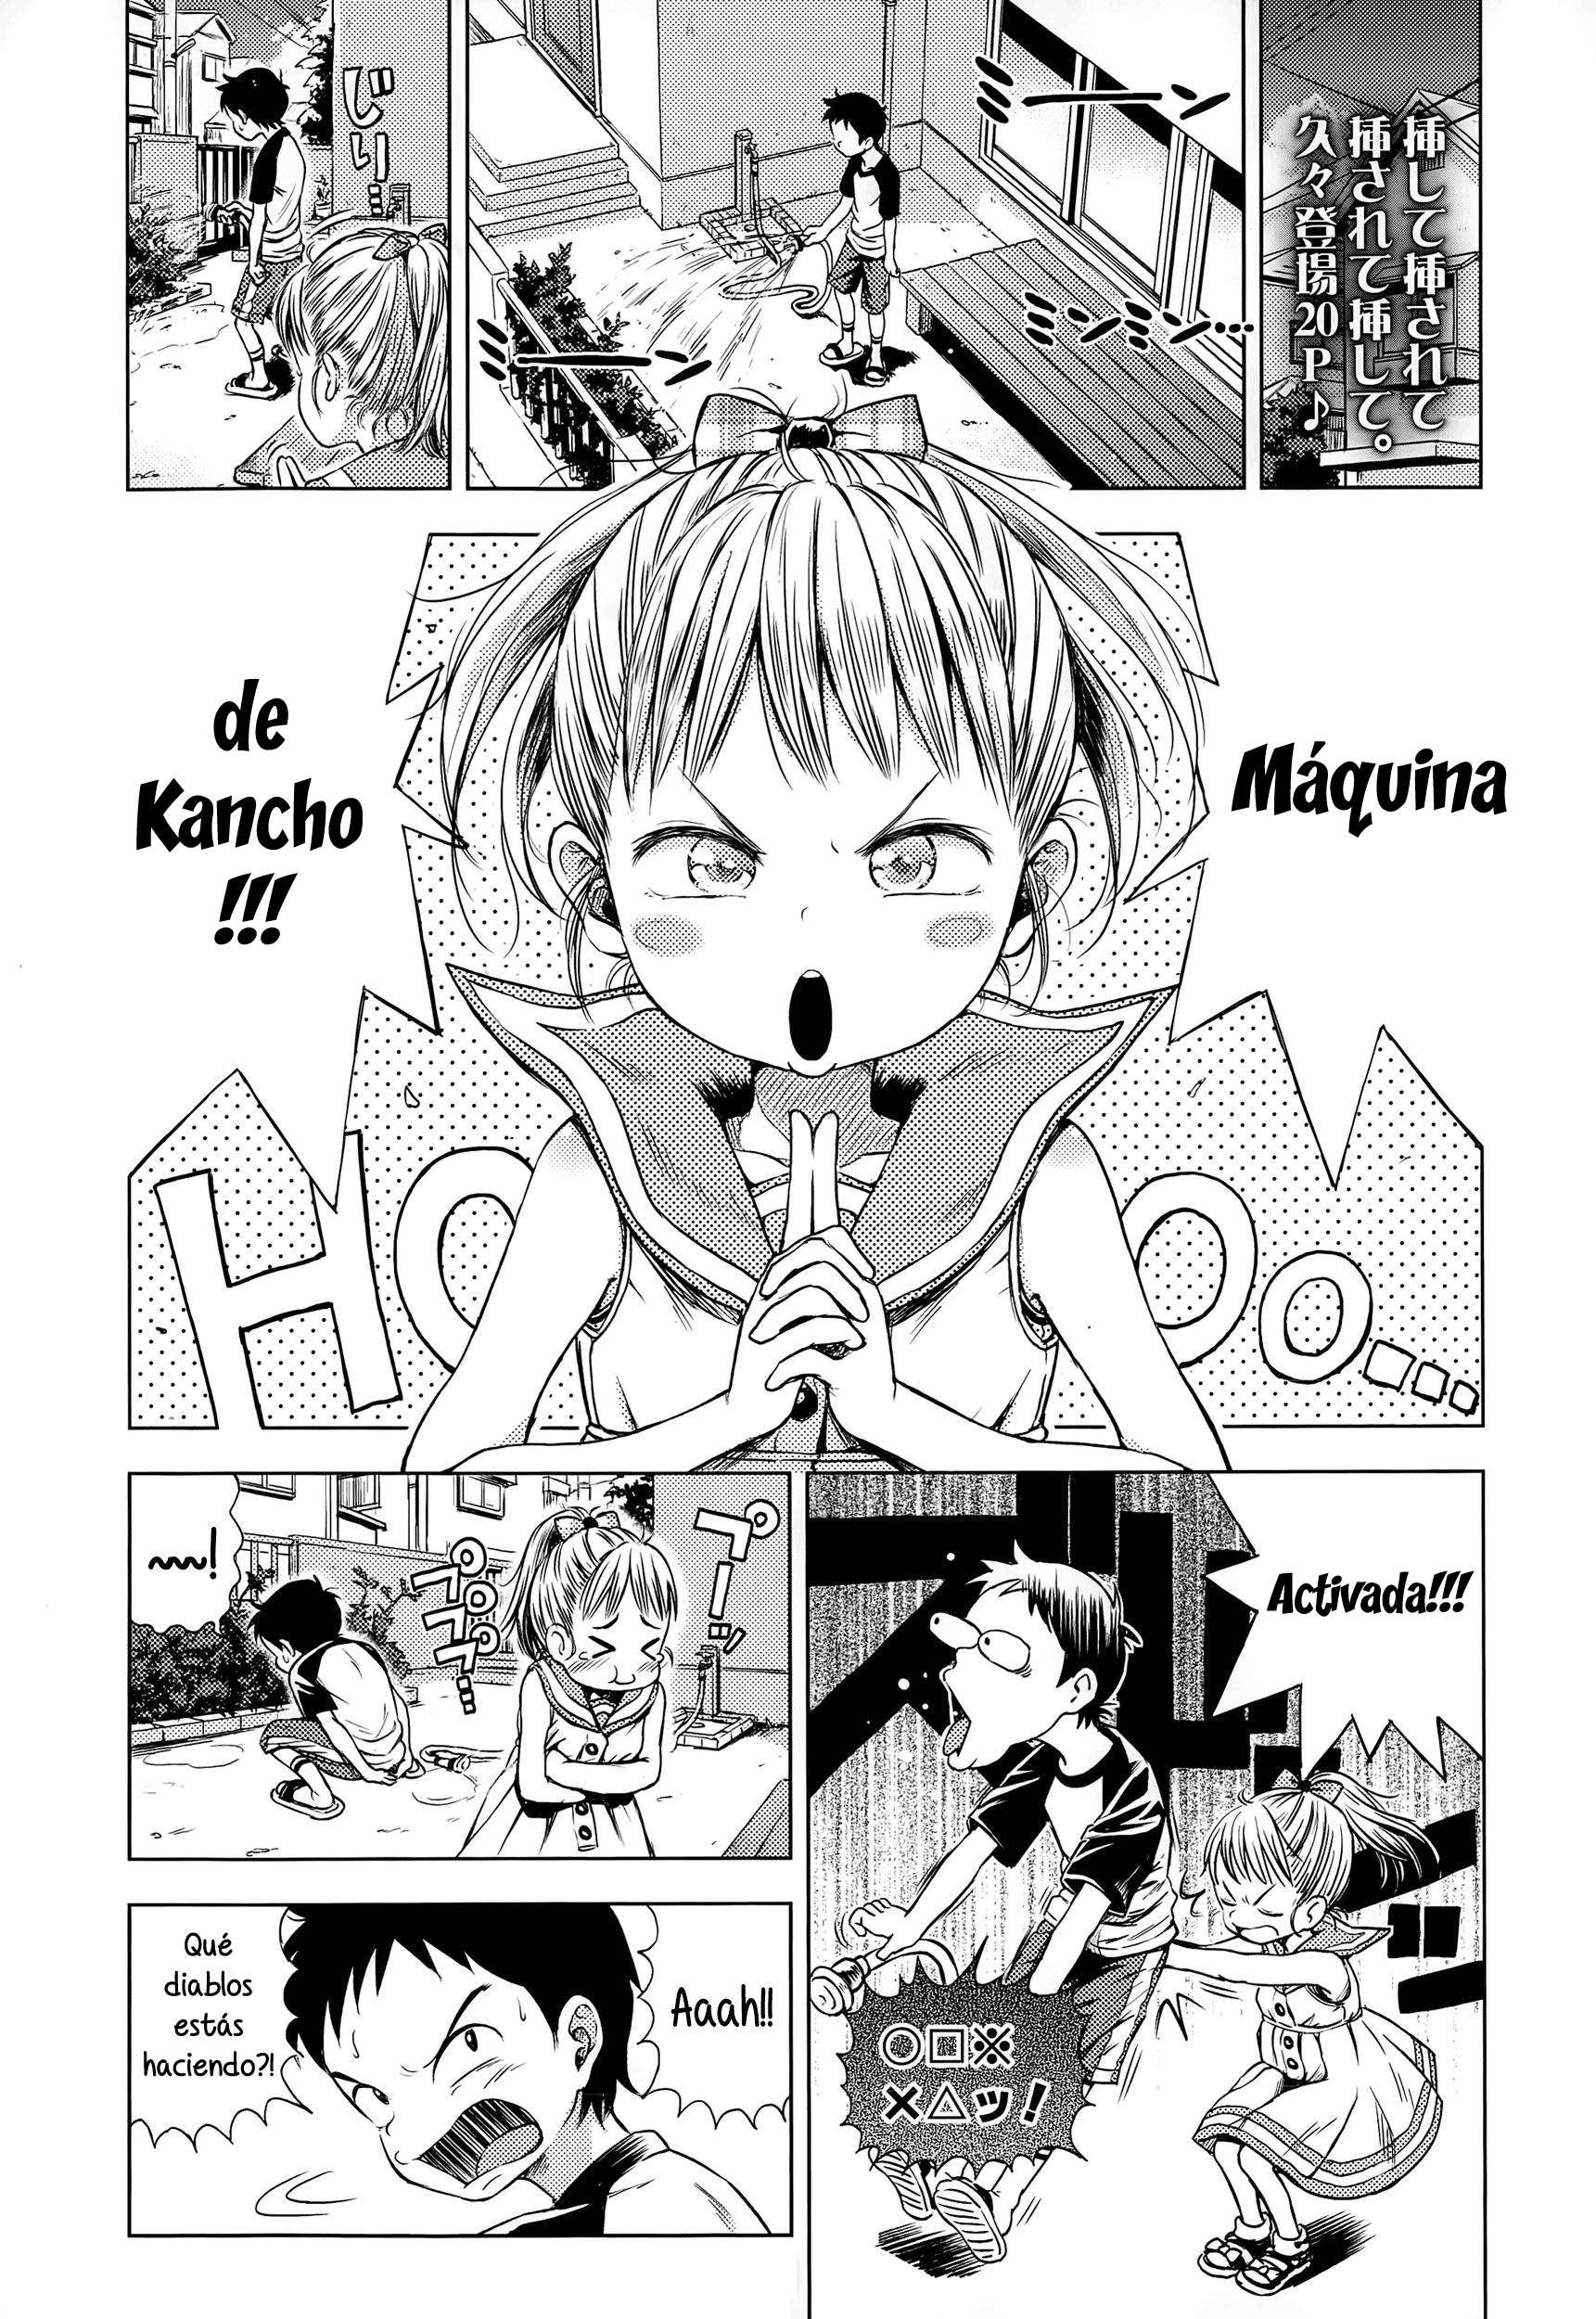 Oaiko Empate Chapter-1 - 0